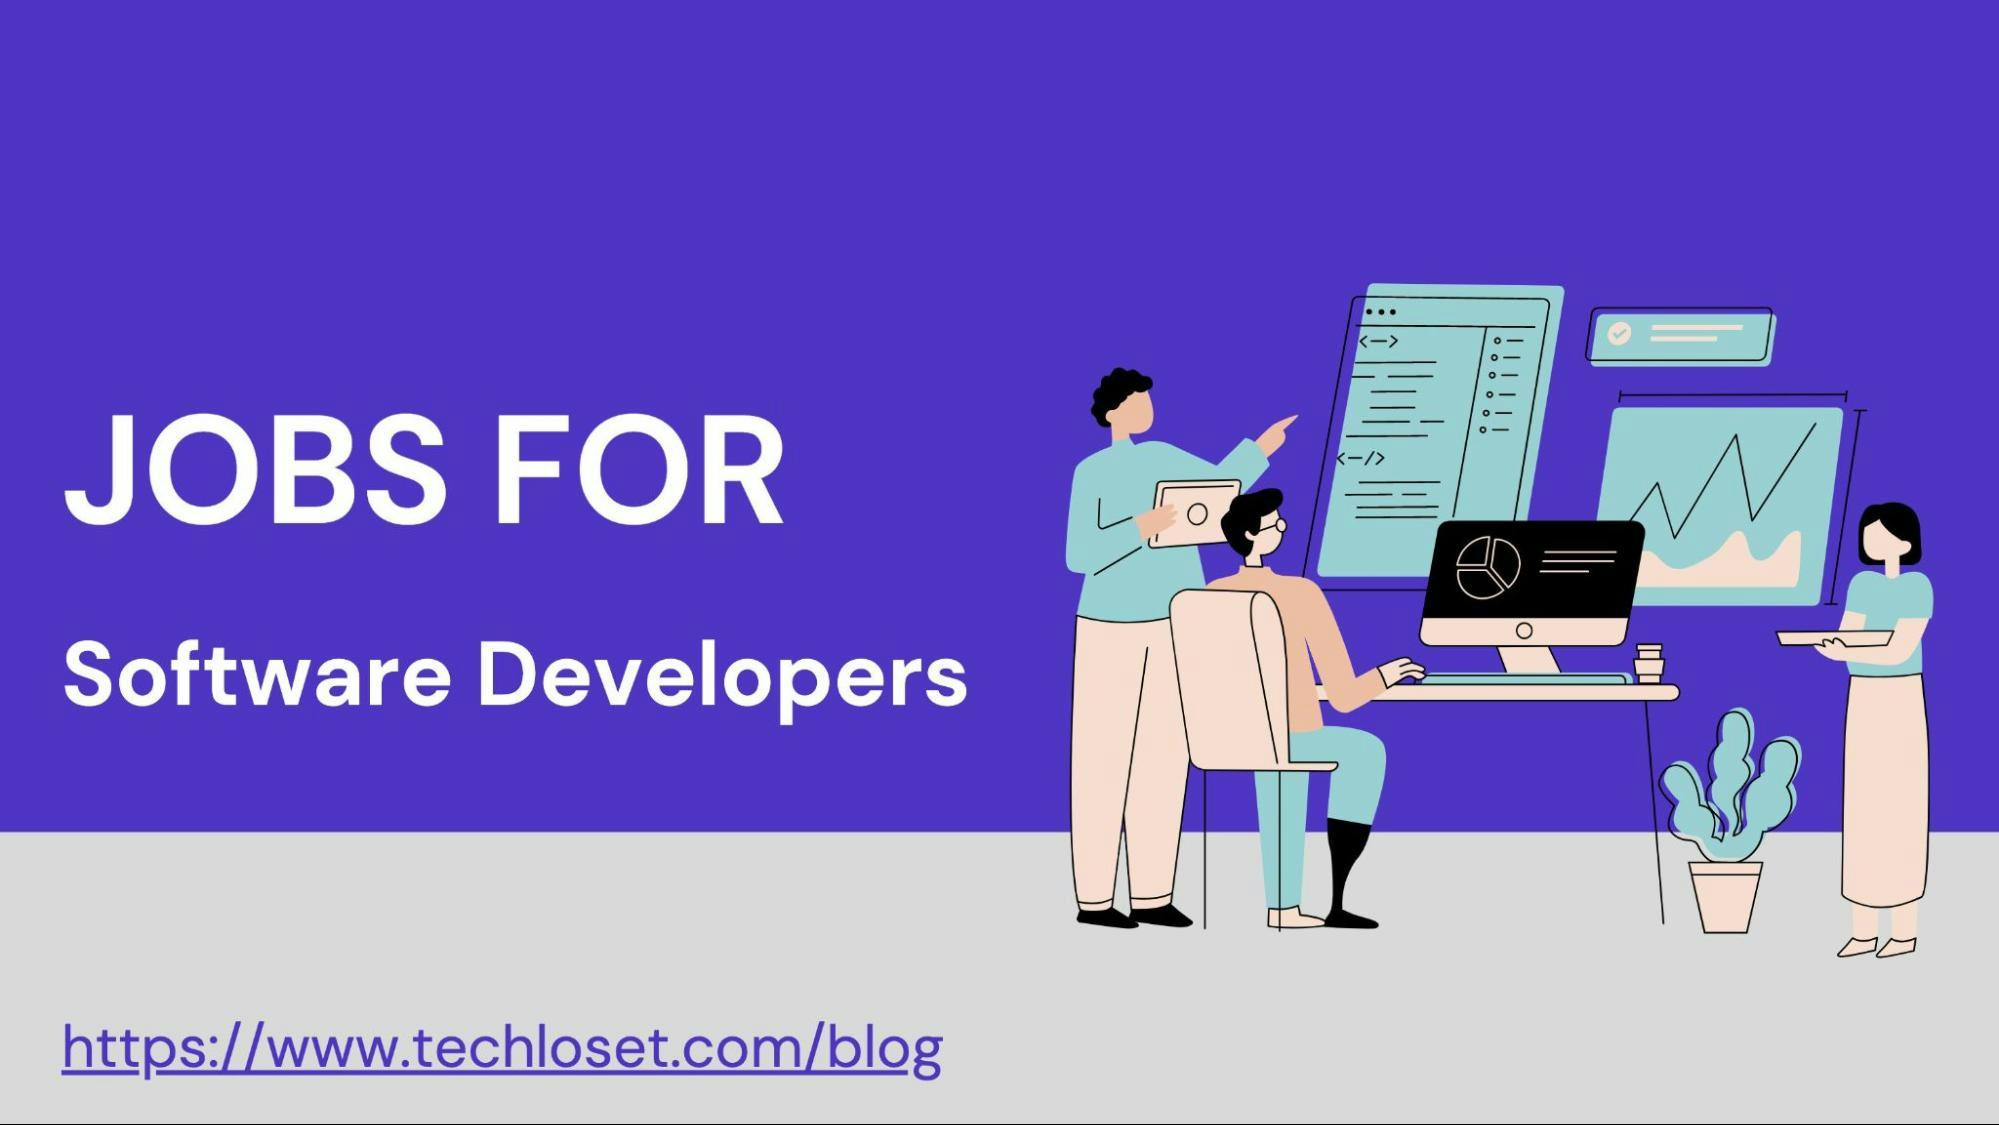 How to Get a Software Development Job? Step-by-Step Guide